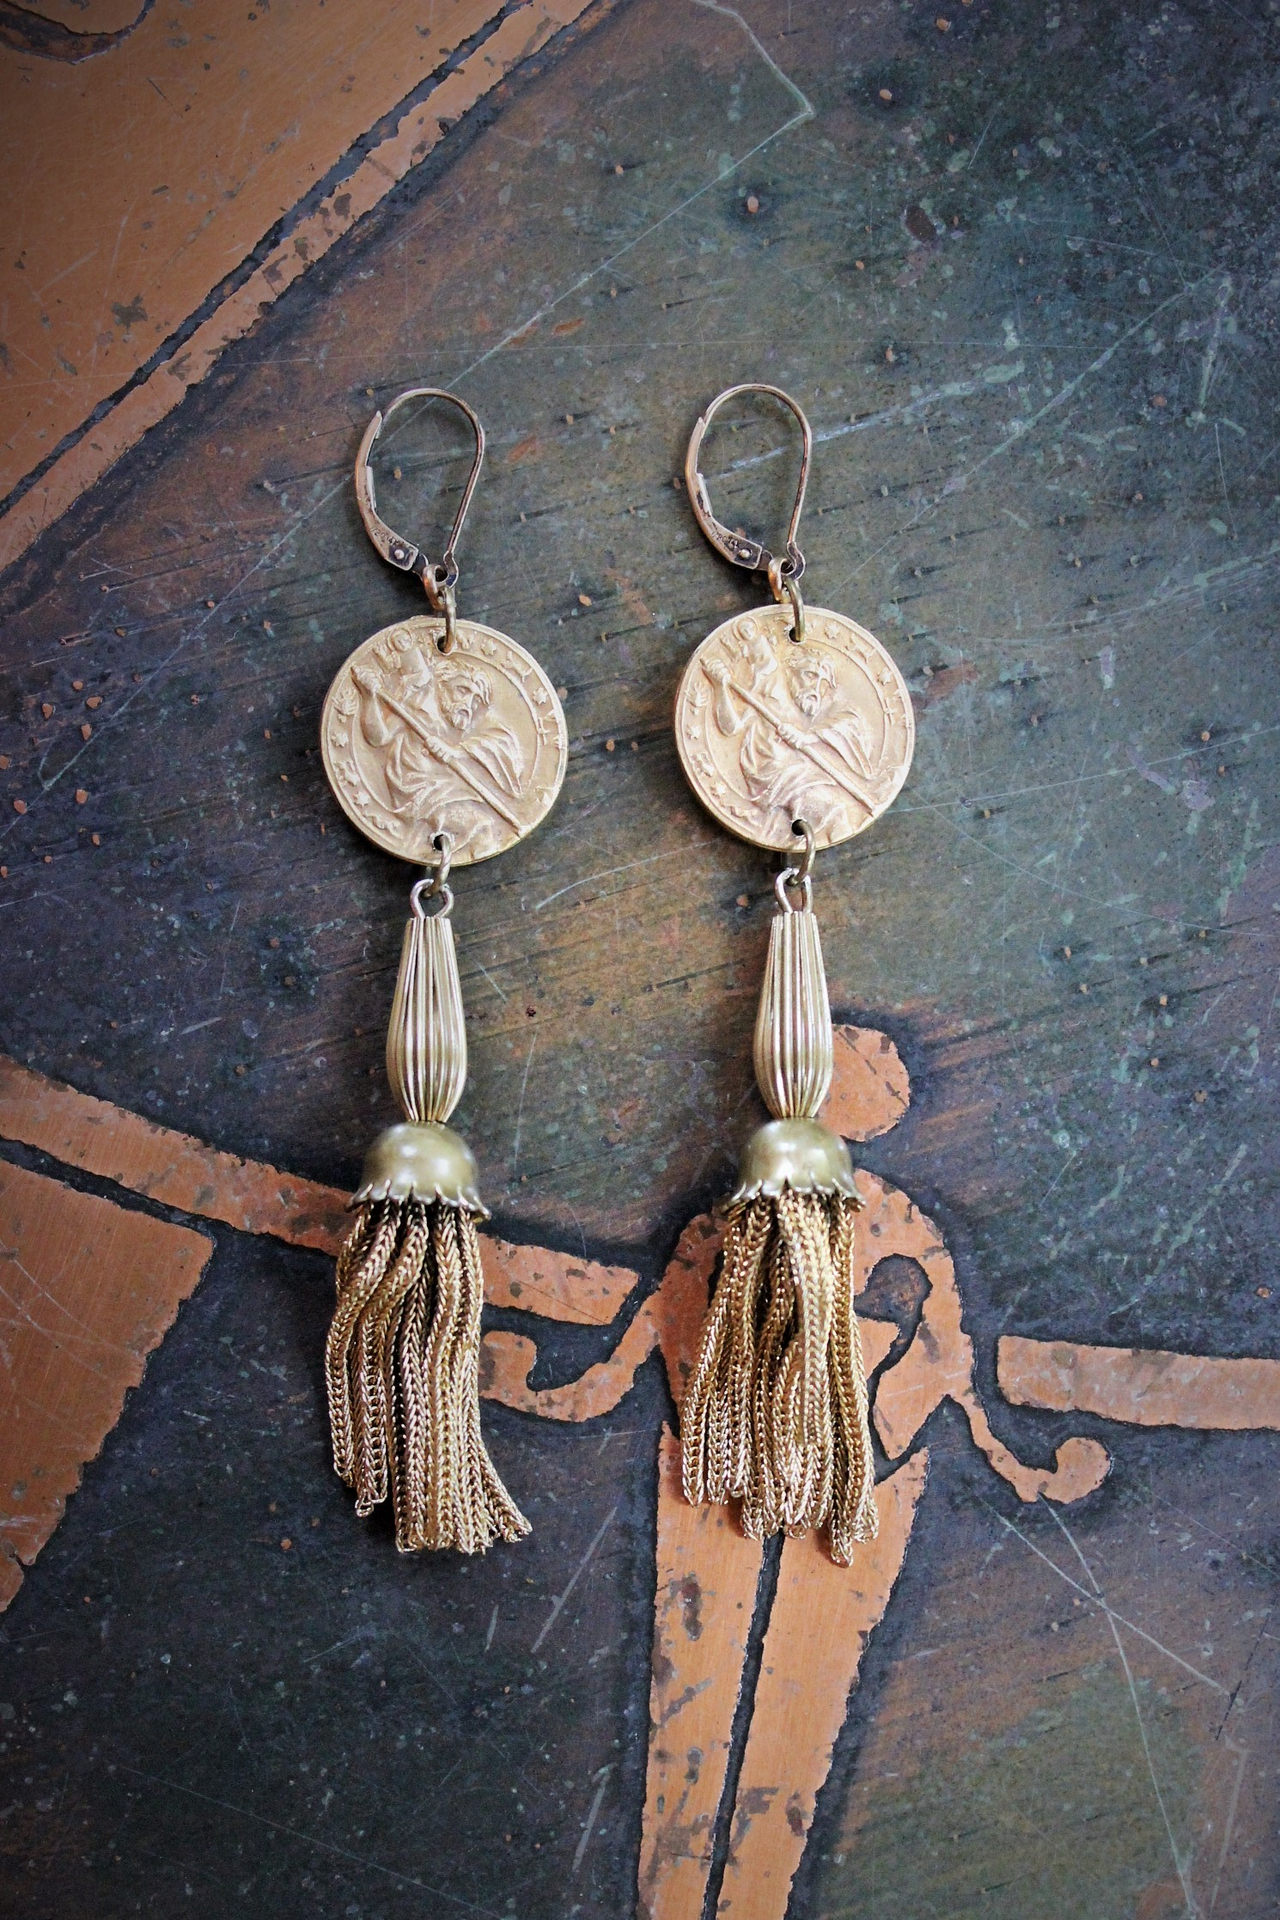 Rare Matching Antique Astrological Saint Christopher Earrings with Antique Foxtail Chain Tassels & Gold Filled Leverback Earring Wires